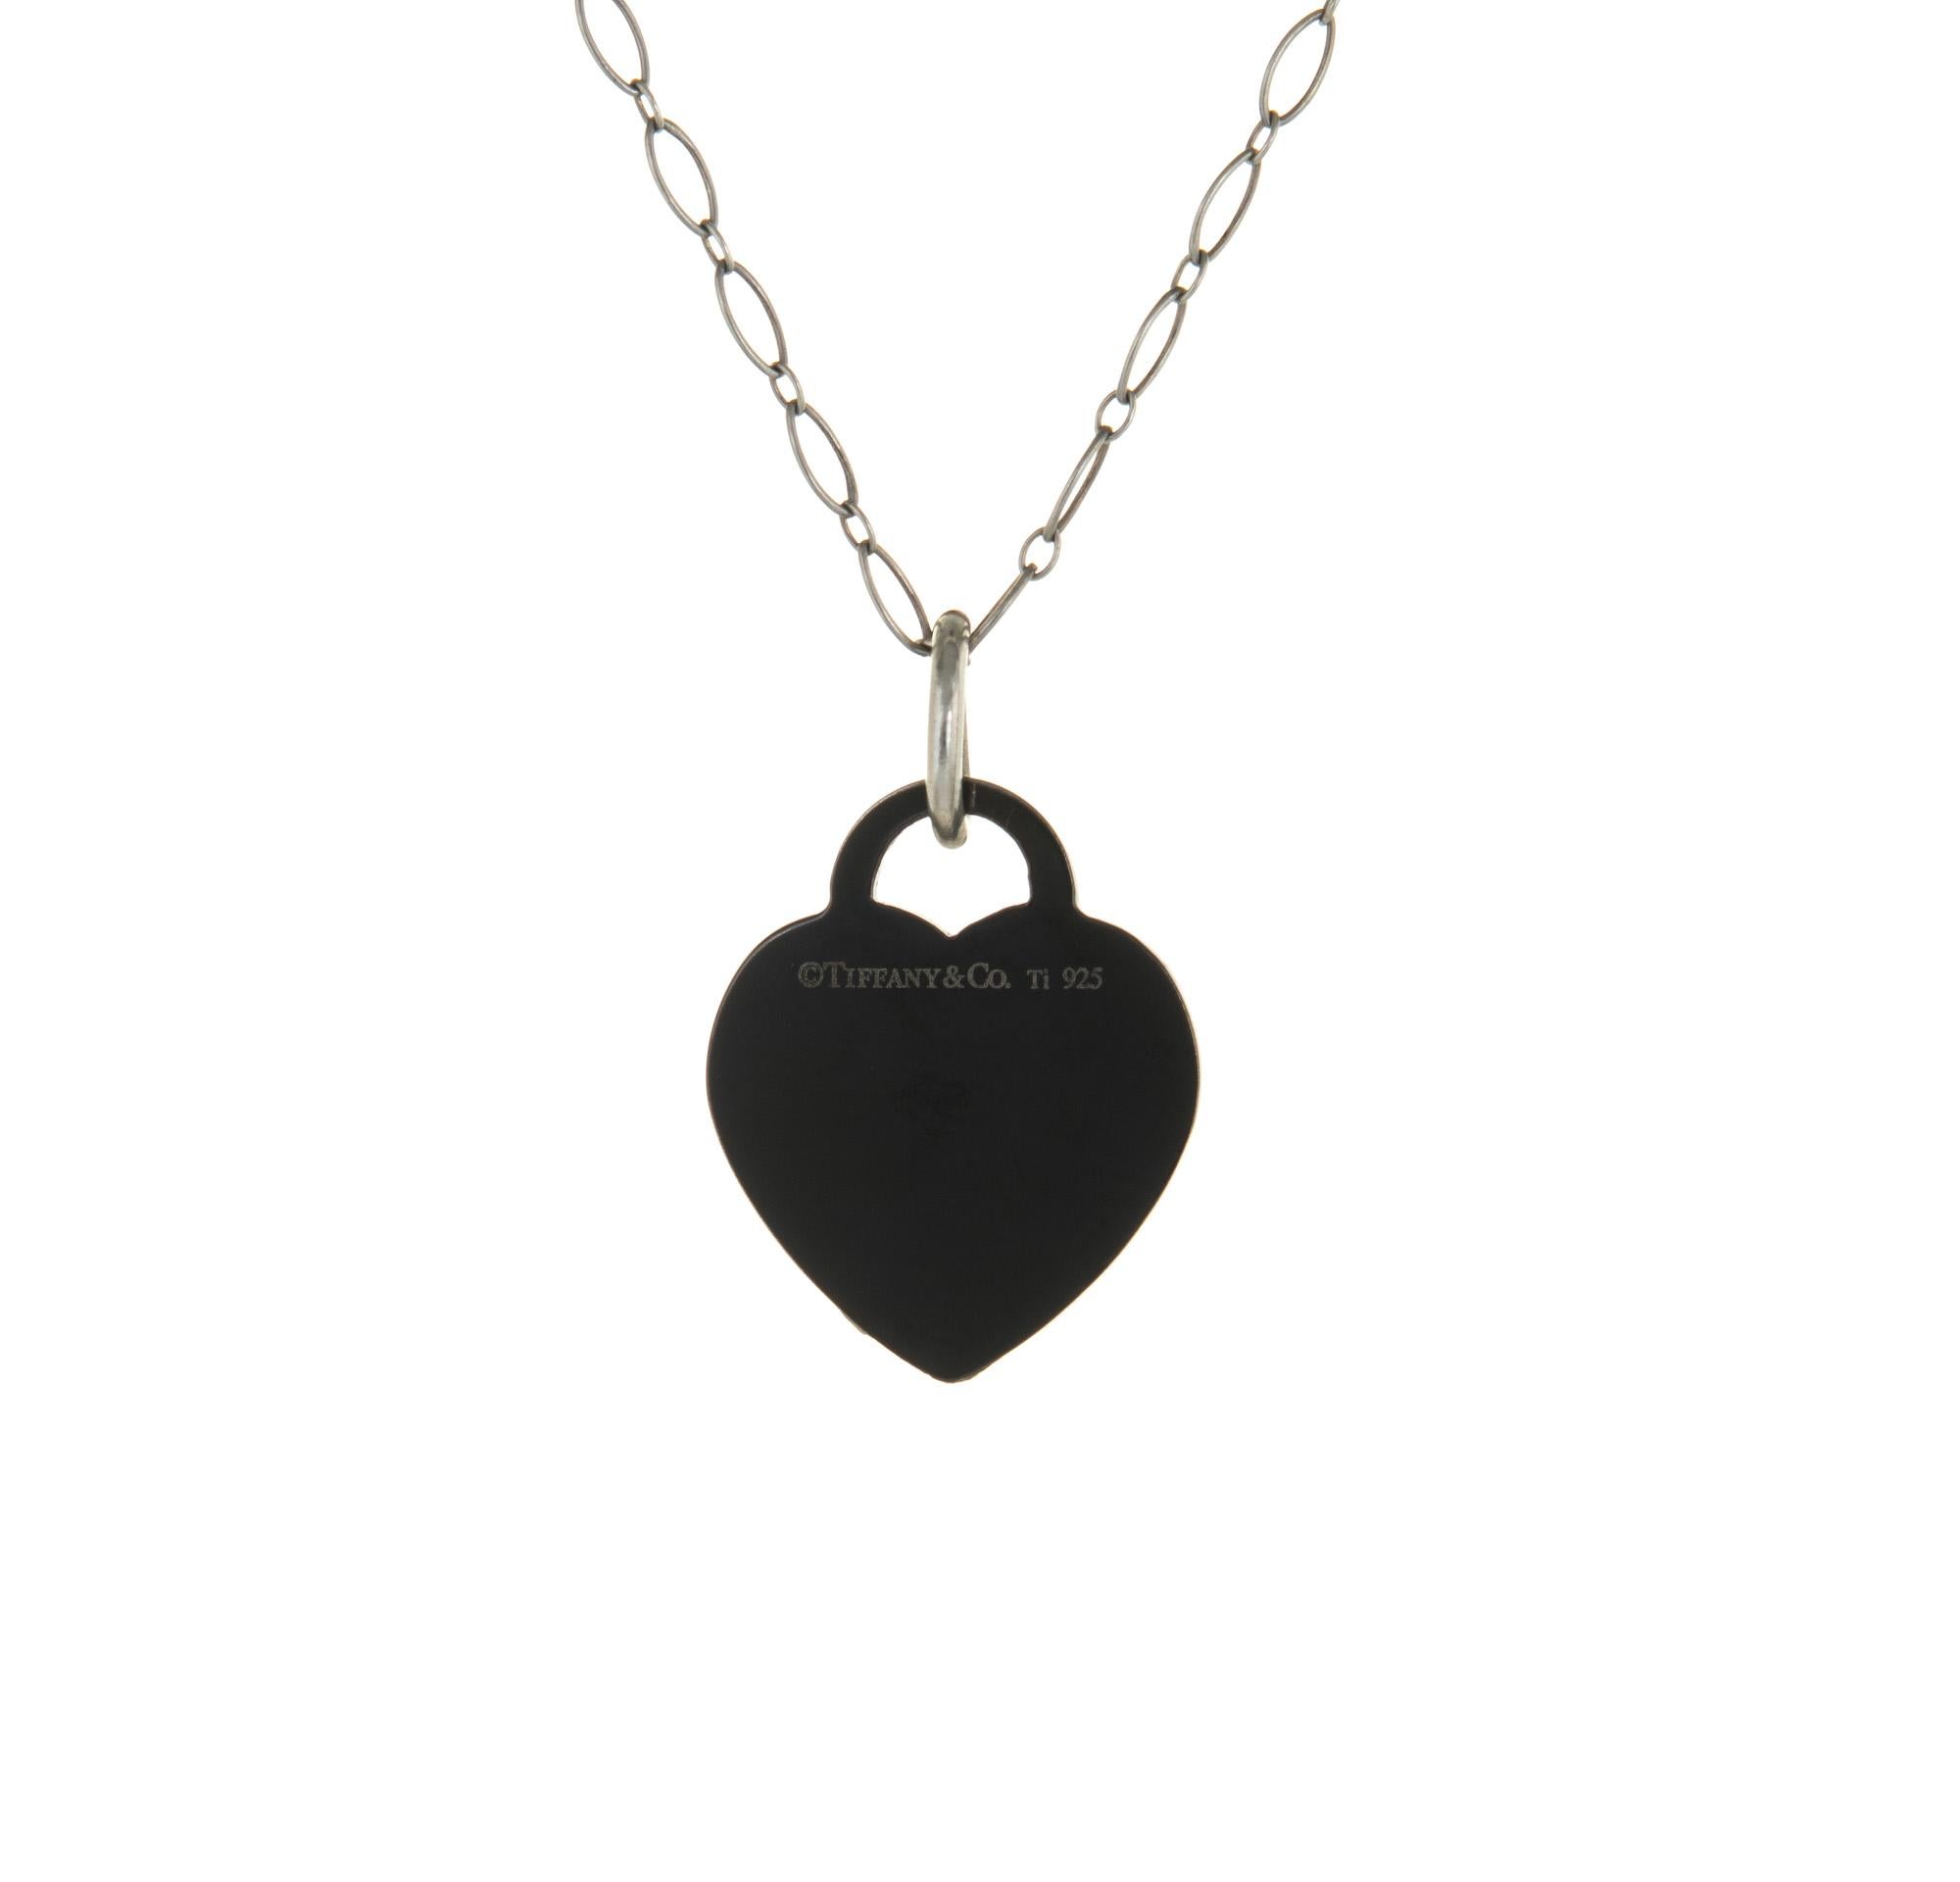 Pre-owned Return to Tiffany & Co heart necklace crafted in Titanium and Sterling Silver.  

The iconic Return to Tiffany & Co heart features a black titanium finish. The pendant comes with a 18 1/2 inch Tiffany & Co sterling silver chain.

The